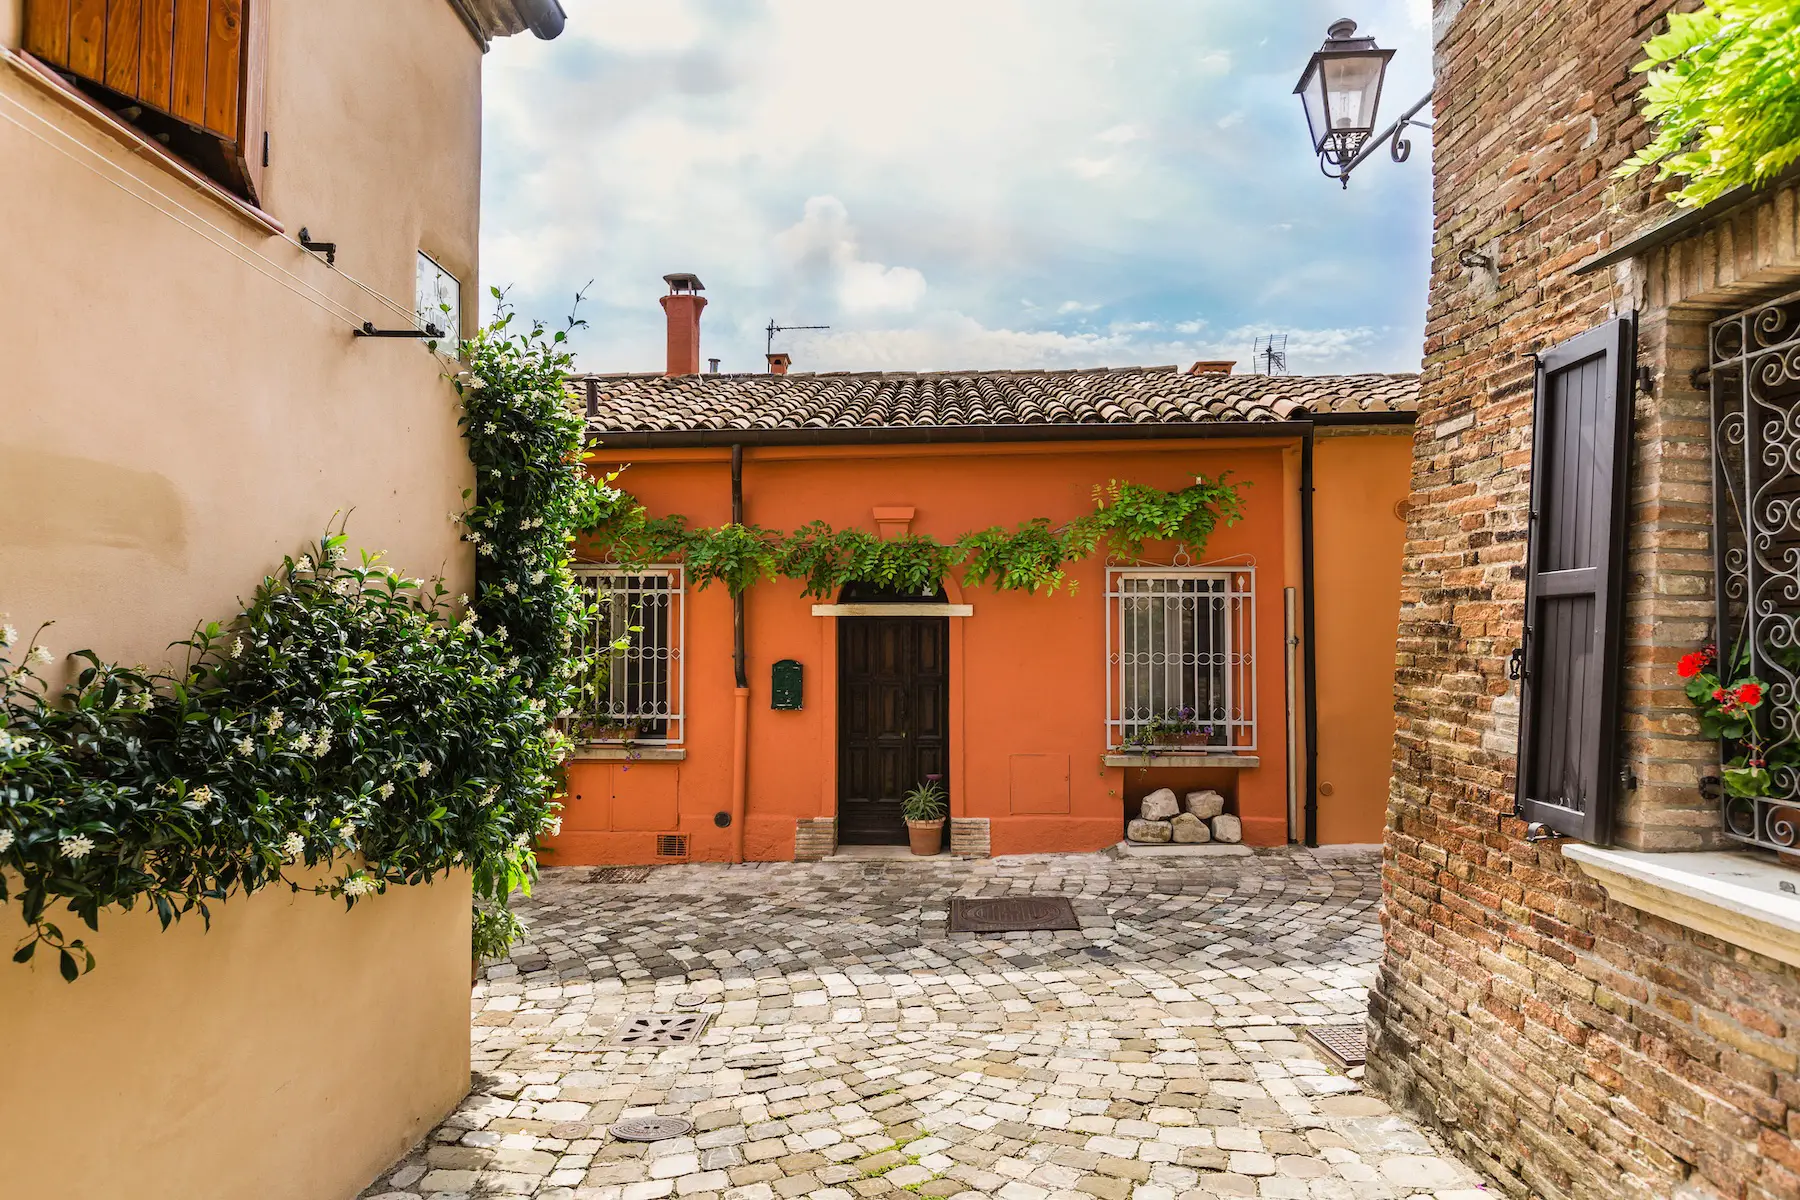 A single-story orange house lies at the end of a quaint, empty alley paved with stones